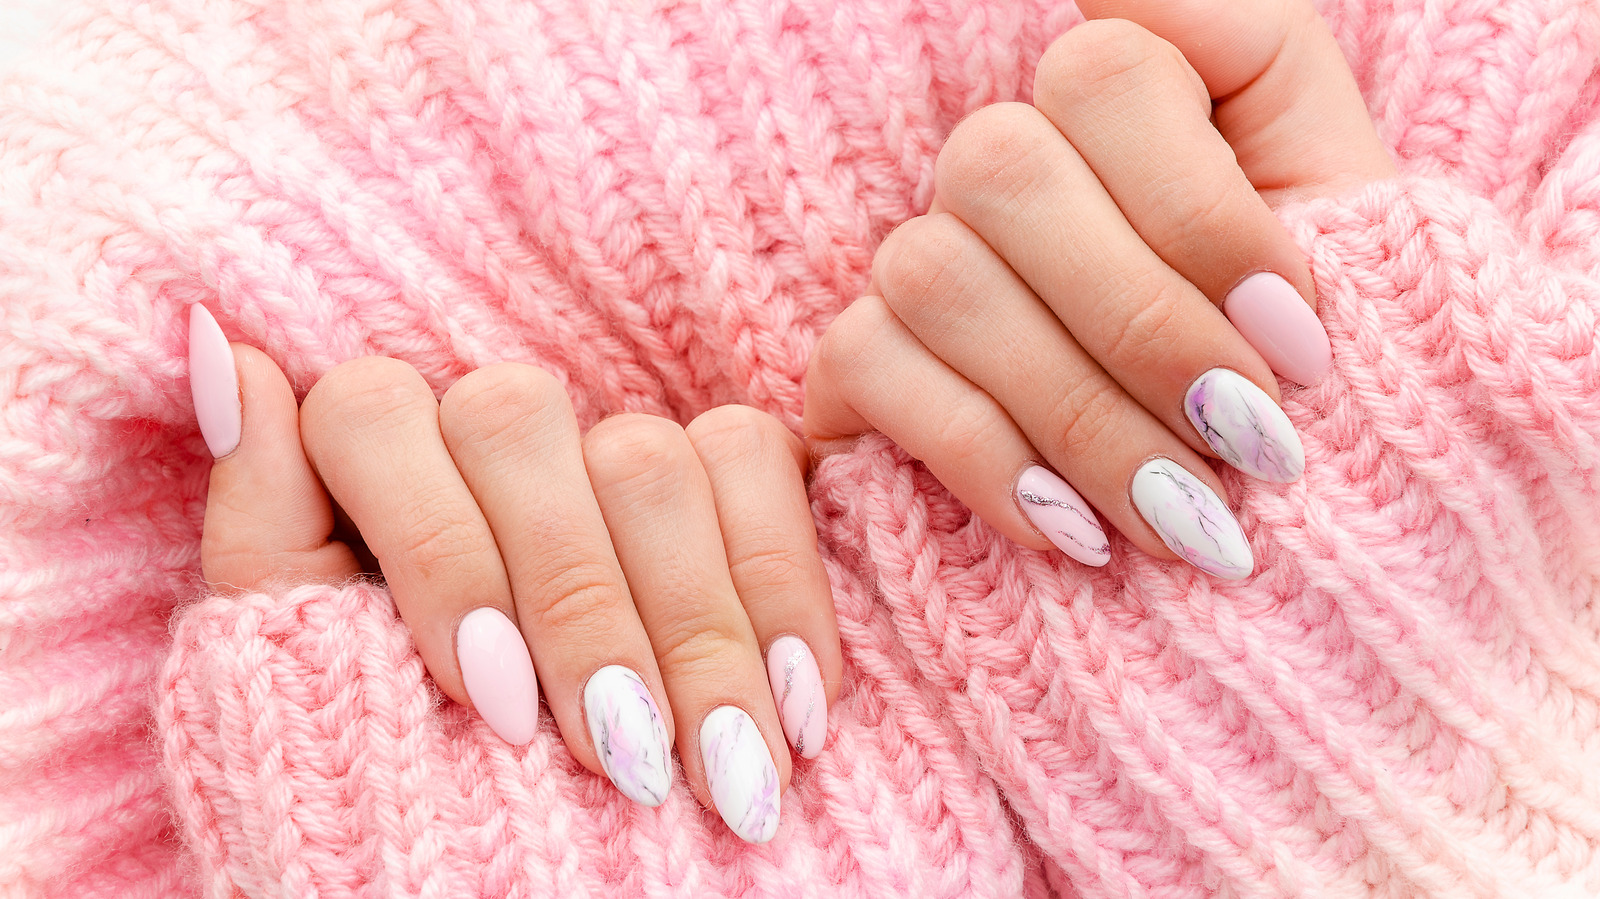 4. "Solid Nail Colors That Will Make Your Hands Look Amazing" - wide 3